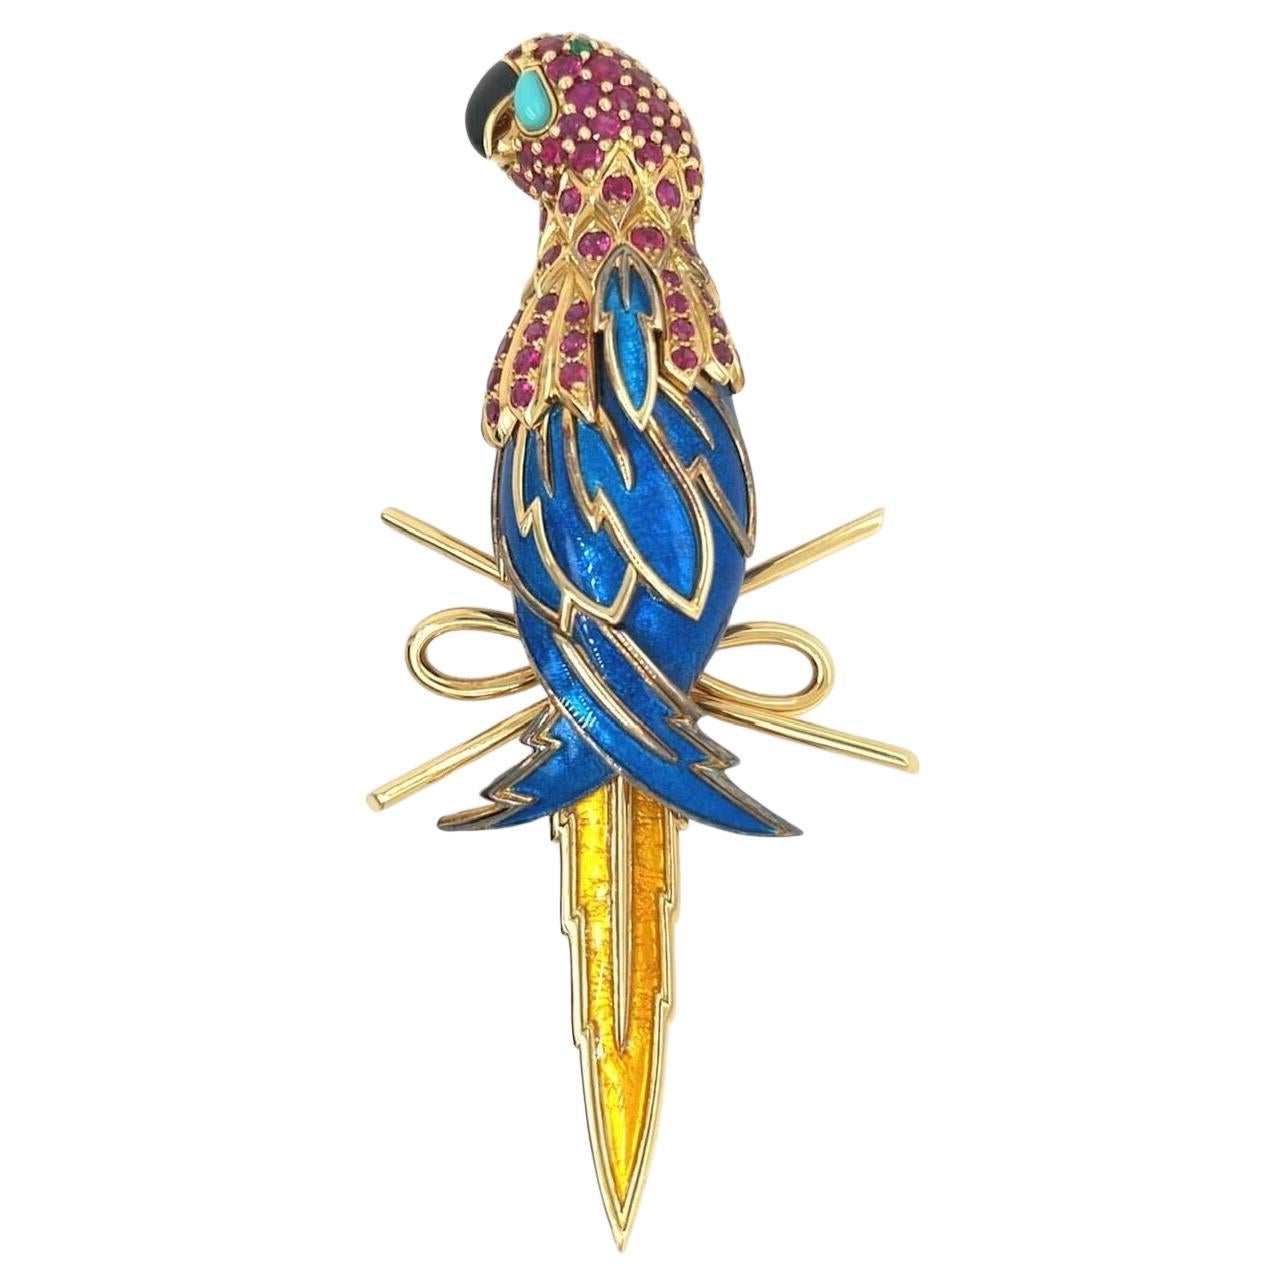 JEAN SCHLUMBERGER, TIFFANY & CO., Yellow Gold, Ruby, Turquoise and Enamel Brooch